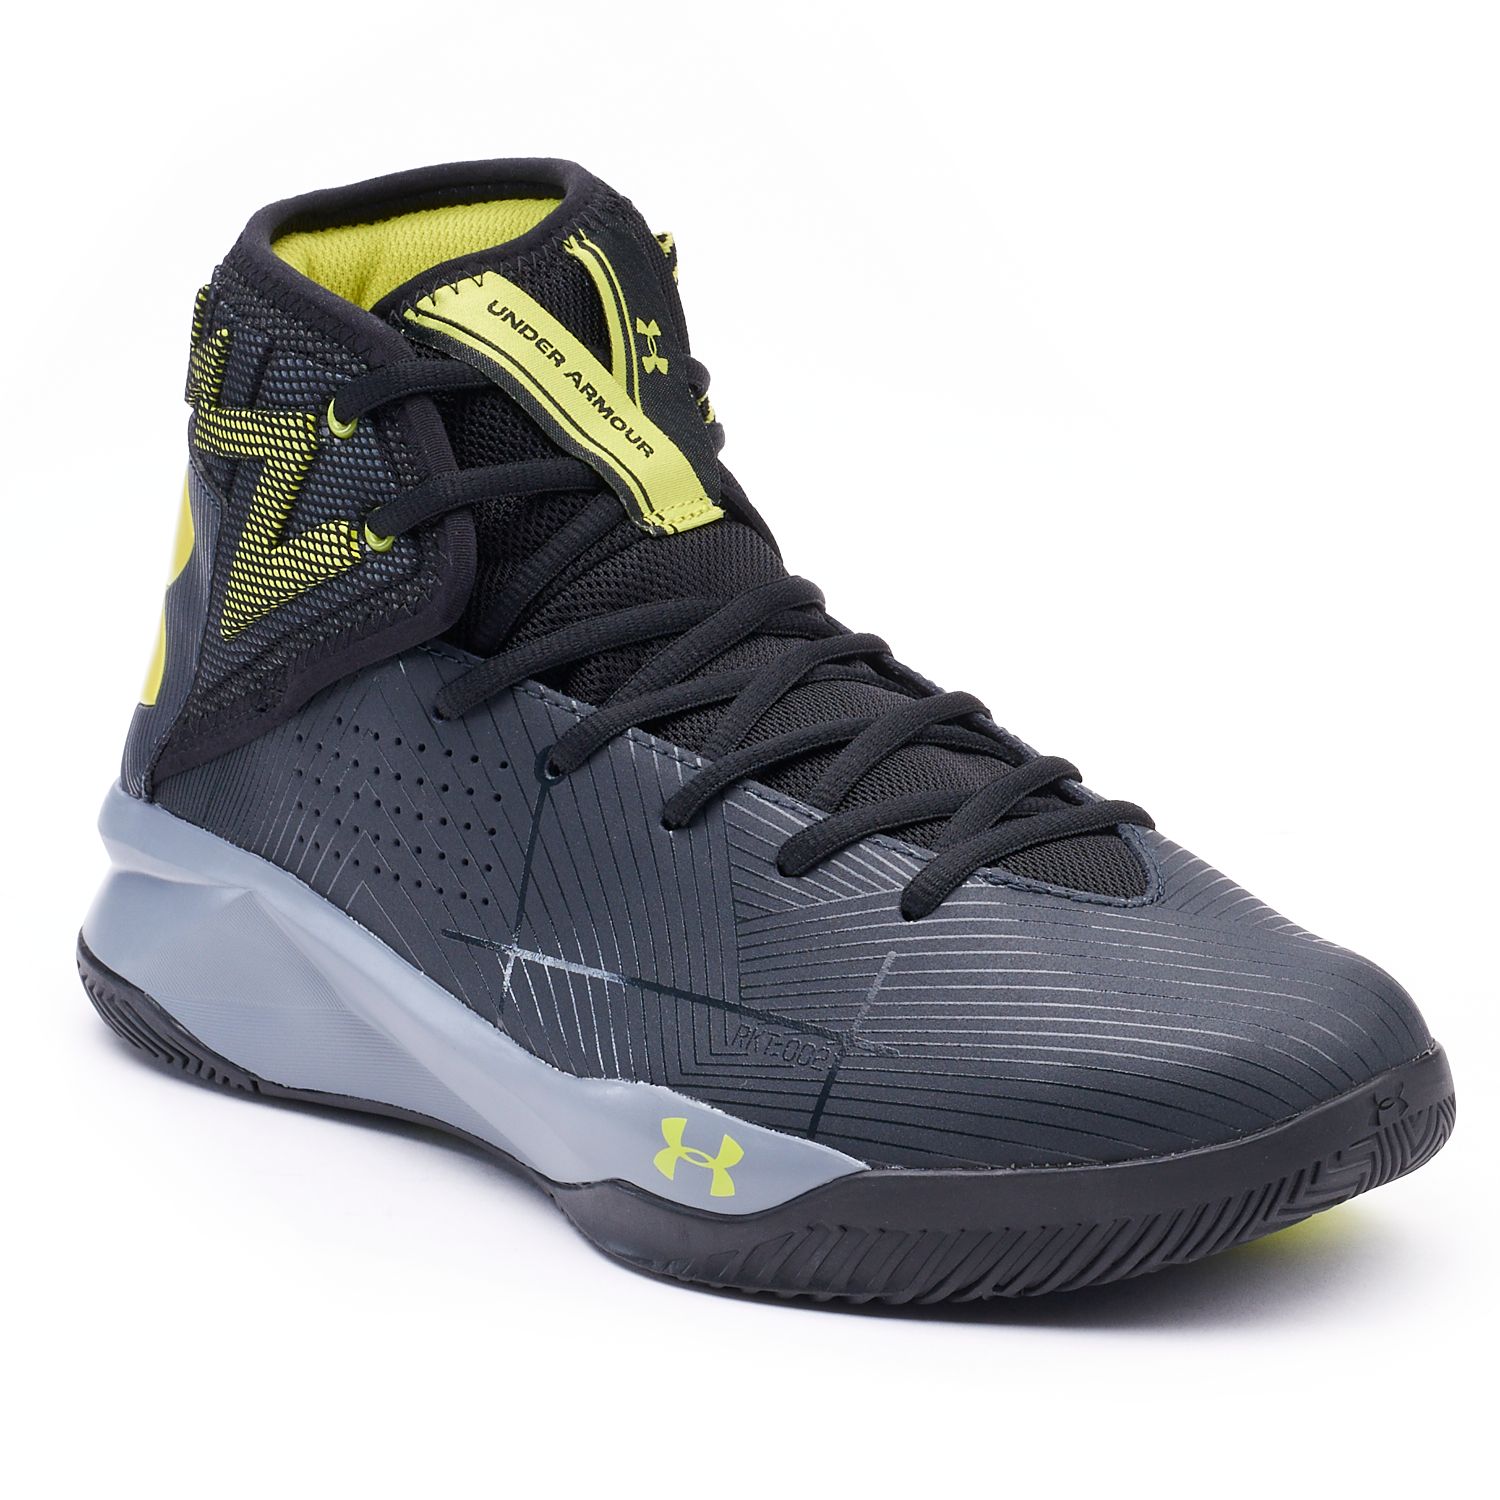 under armour rocket 2 basketball shoes